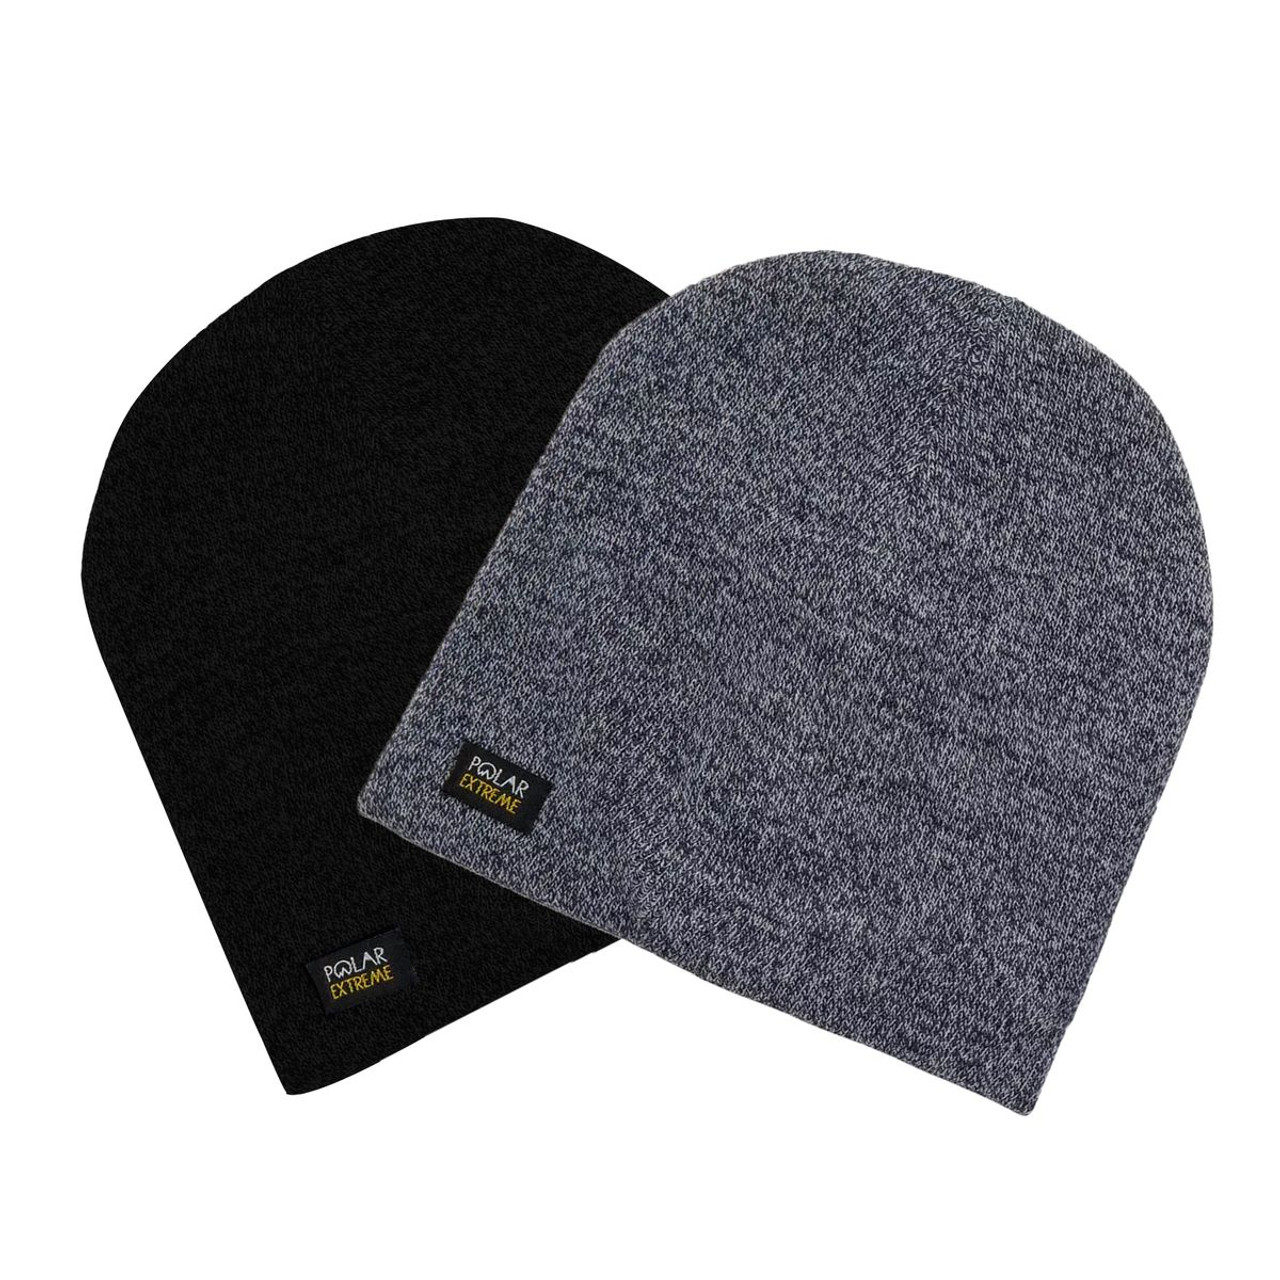 Men's Insulated Knitted Bennie Hats (2-Pack) product image